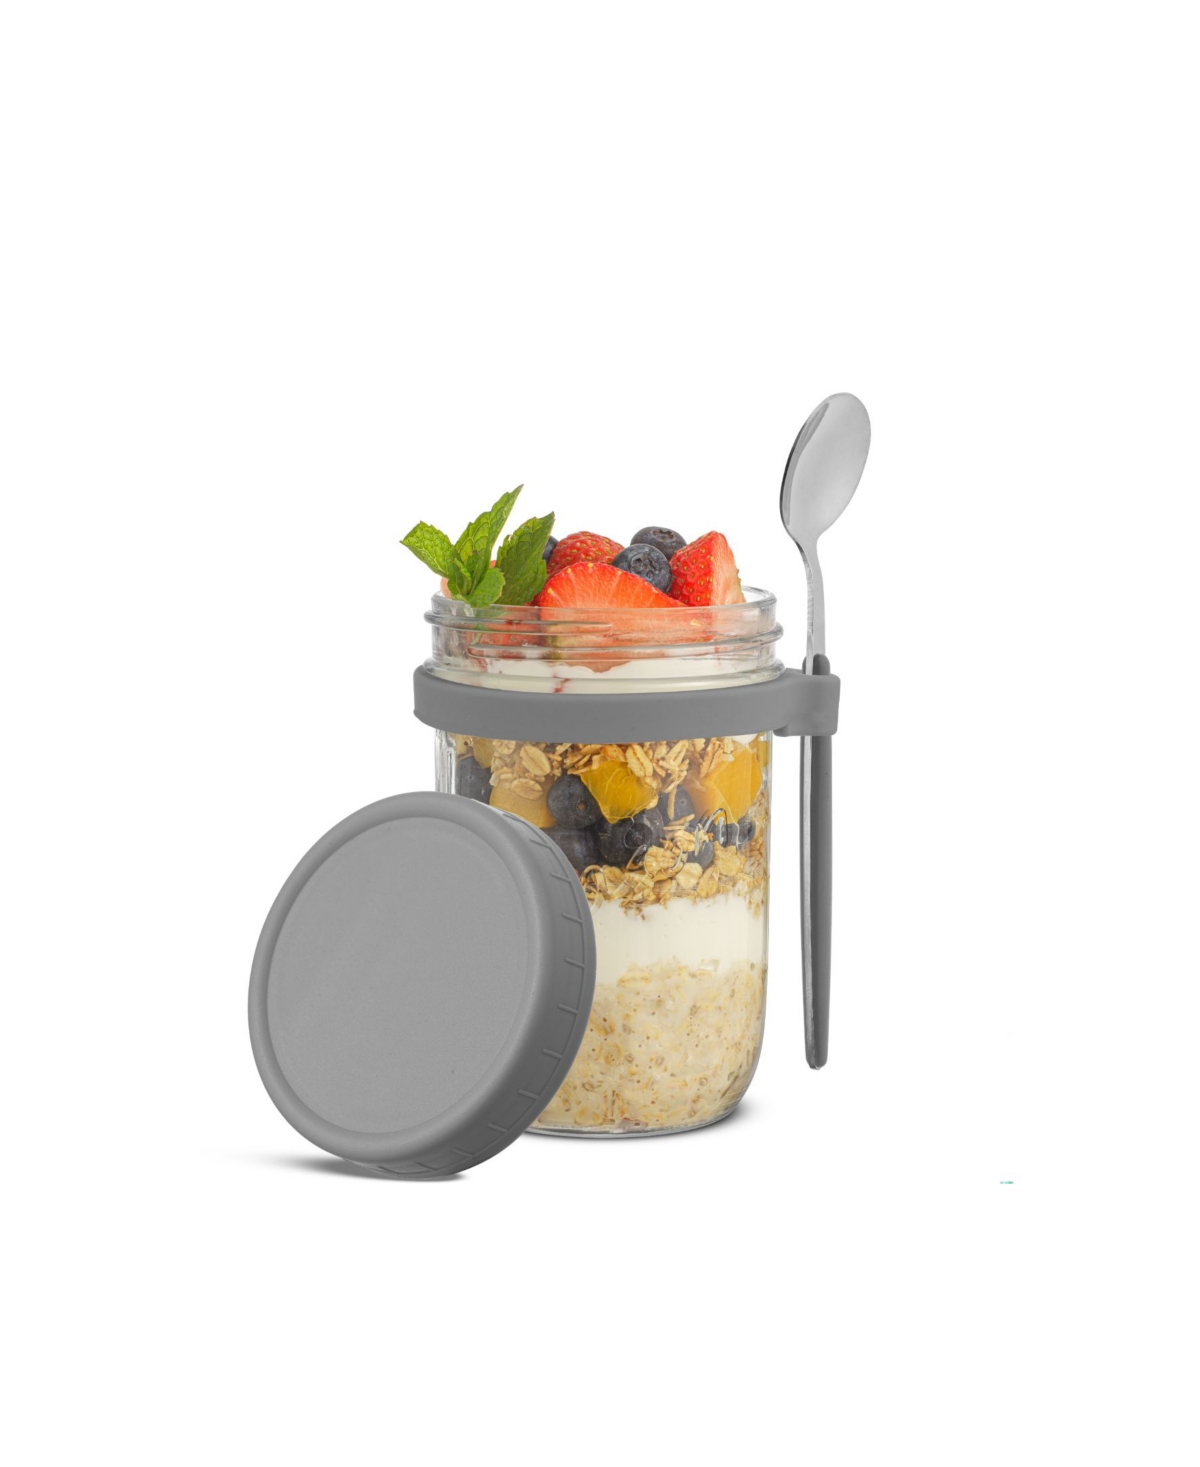 Dawn Overnight Oats Glass Containers, 16 Oz, Set of 3 - Gray